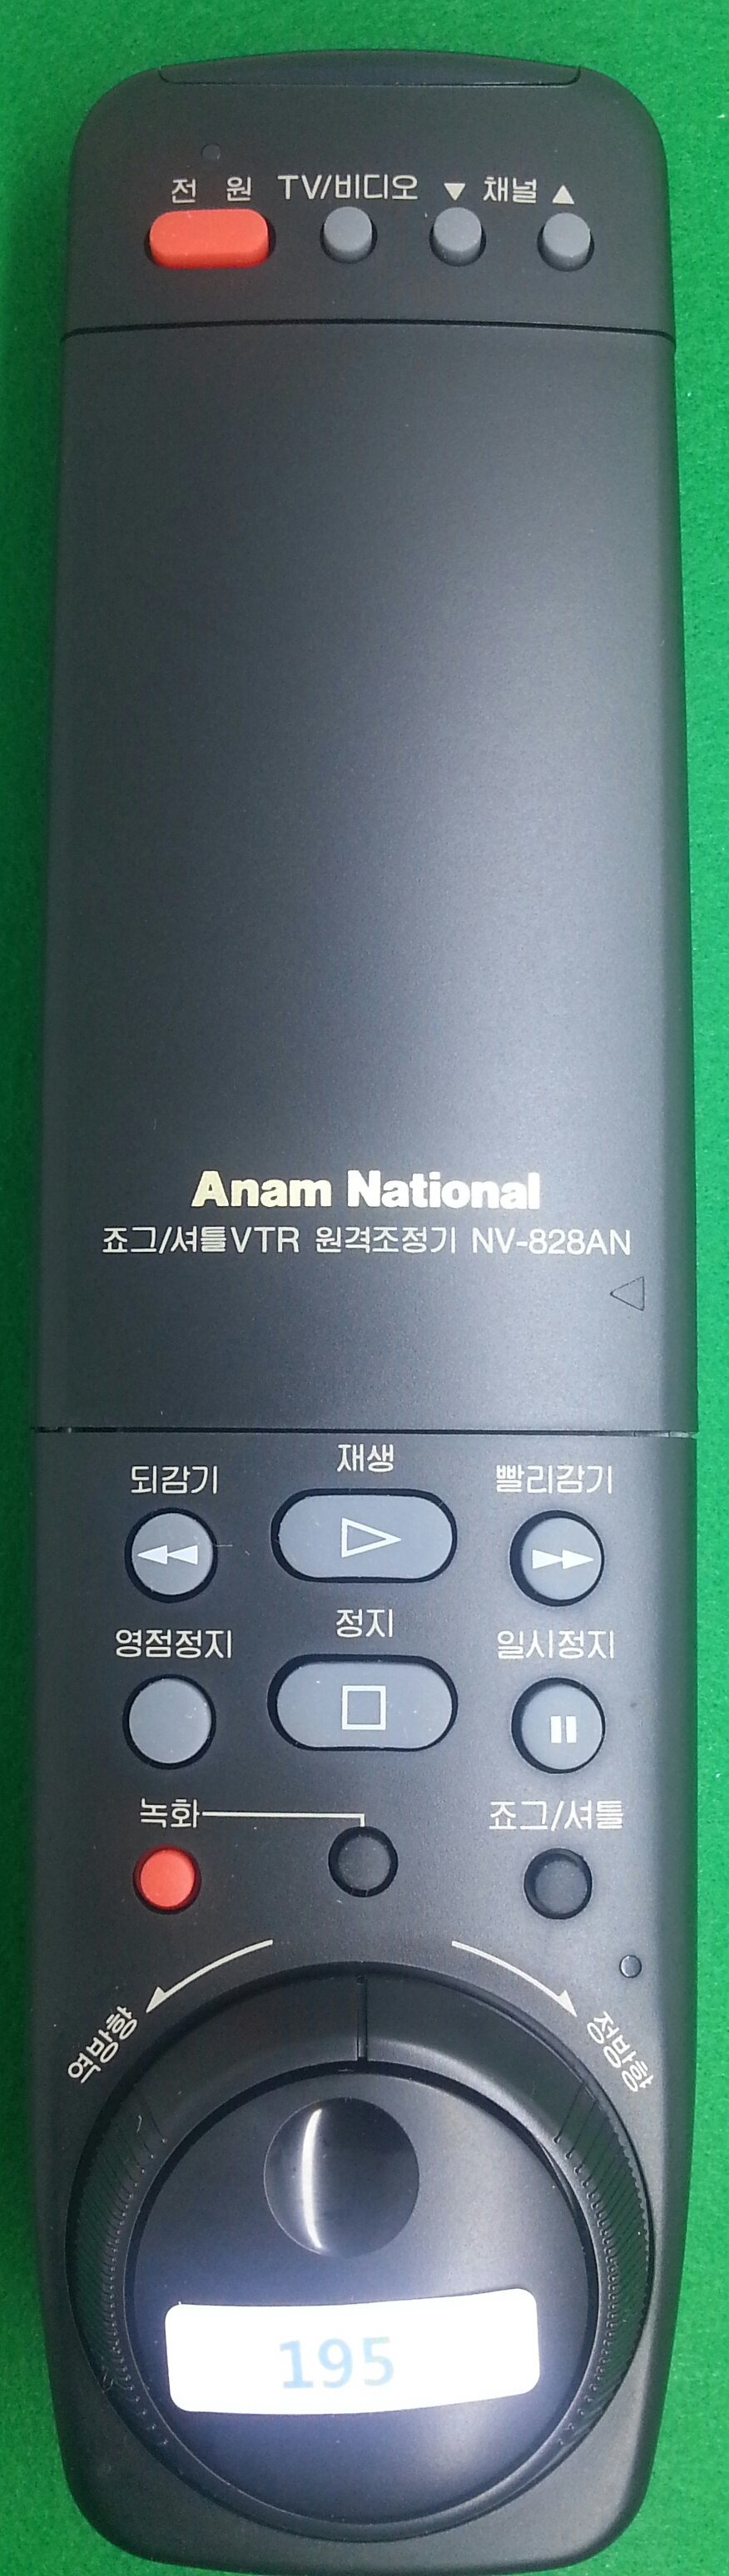 195_ANAM_NATIONAL_NV-828AN_cover-1.jpg